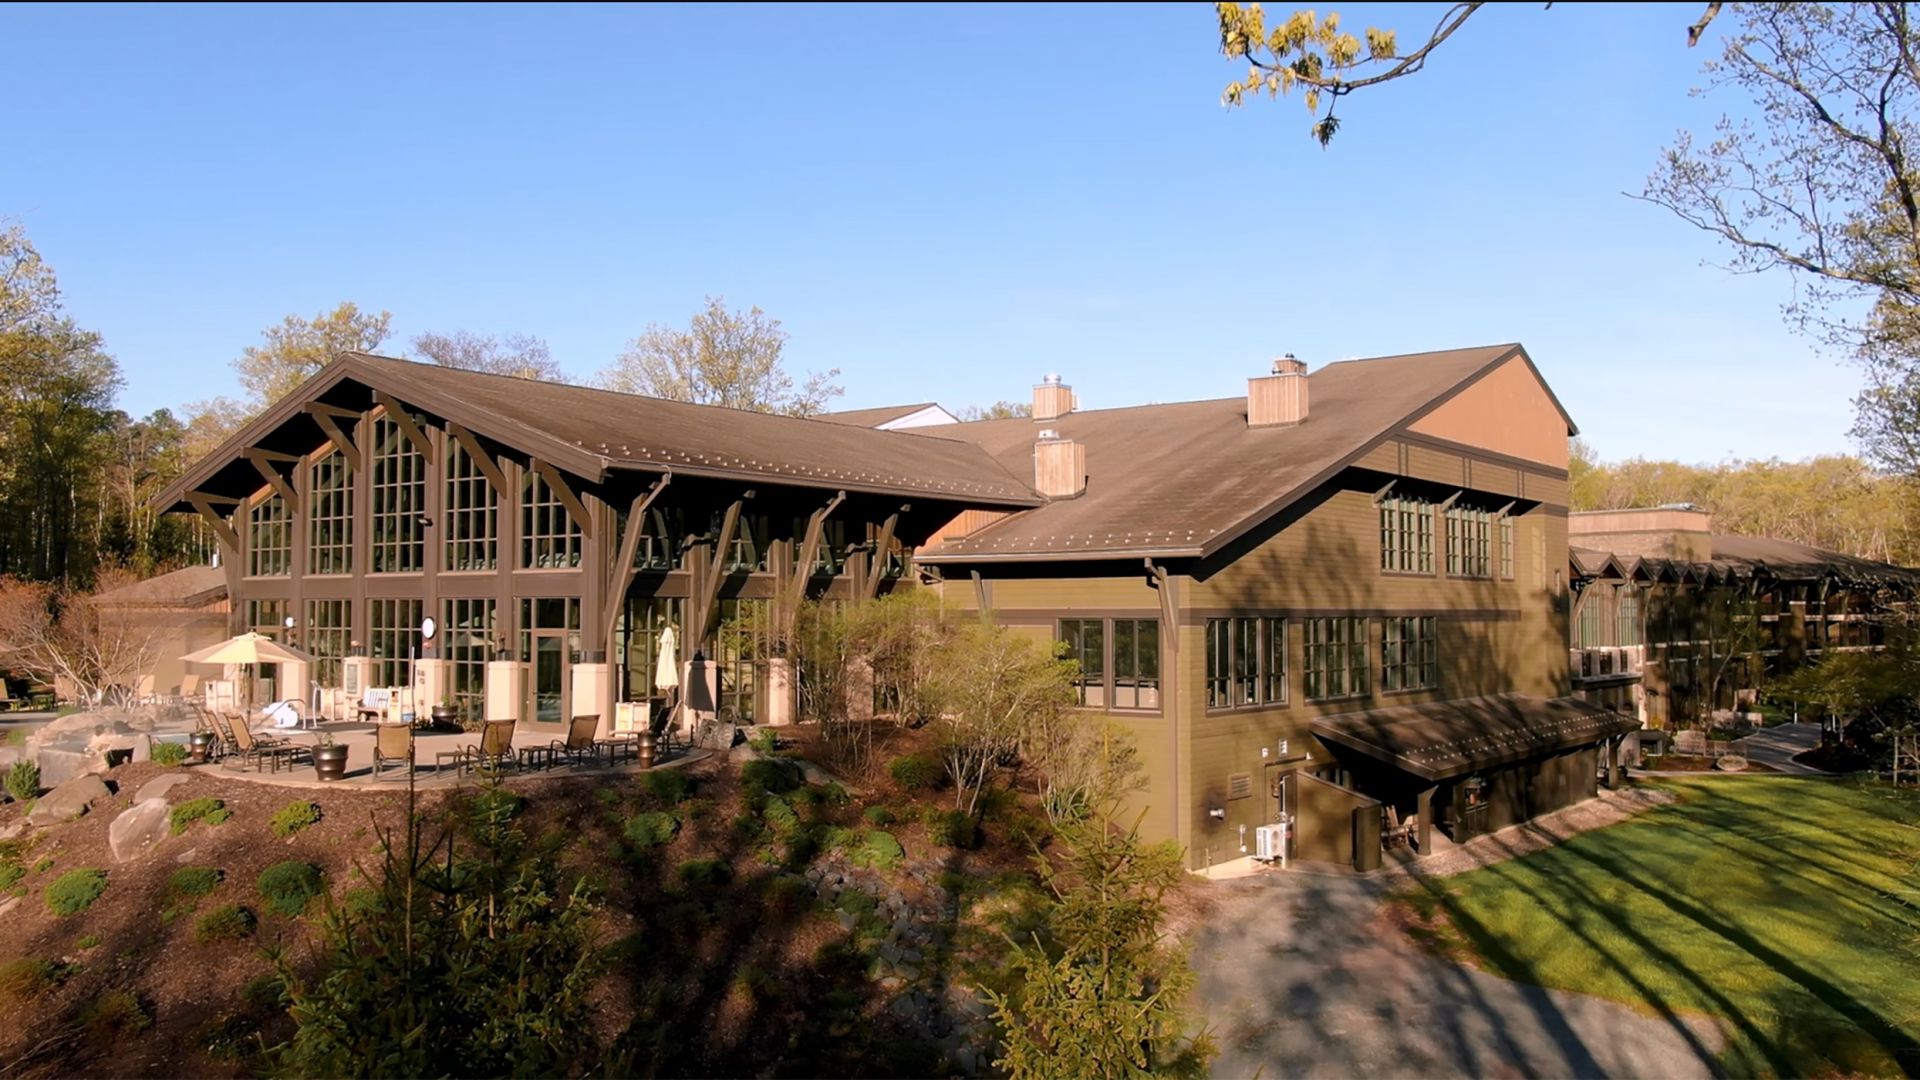 A drone view showing the architecture of the building in Spring at The Lodge at Woodloch